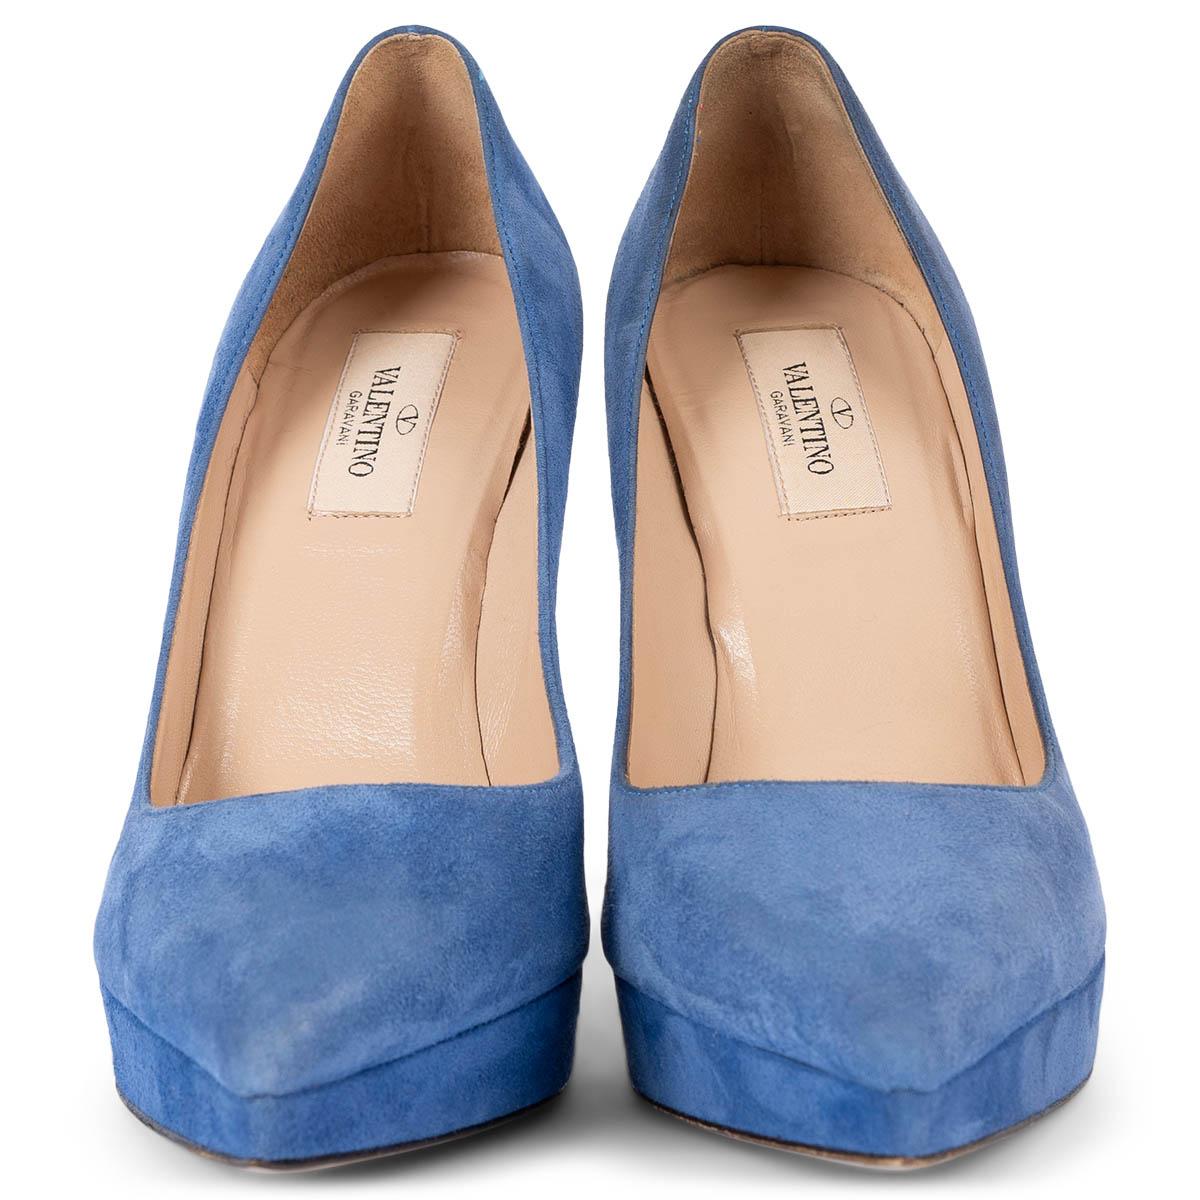 100% authentic Valentino pointed-toe platform pumps in sky blue suede. Have been worn once and are in virtually condition. 

Measurements
Imprinted Size	37
Shoe Size	37
Inside Sole	24cm (9.4in)
Width	7cm (2.7in)
Heel	12cm (4.7in)
Platform:	2cm